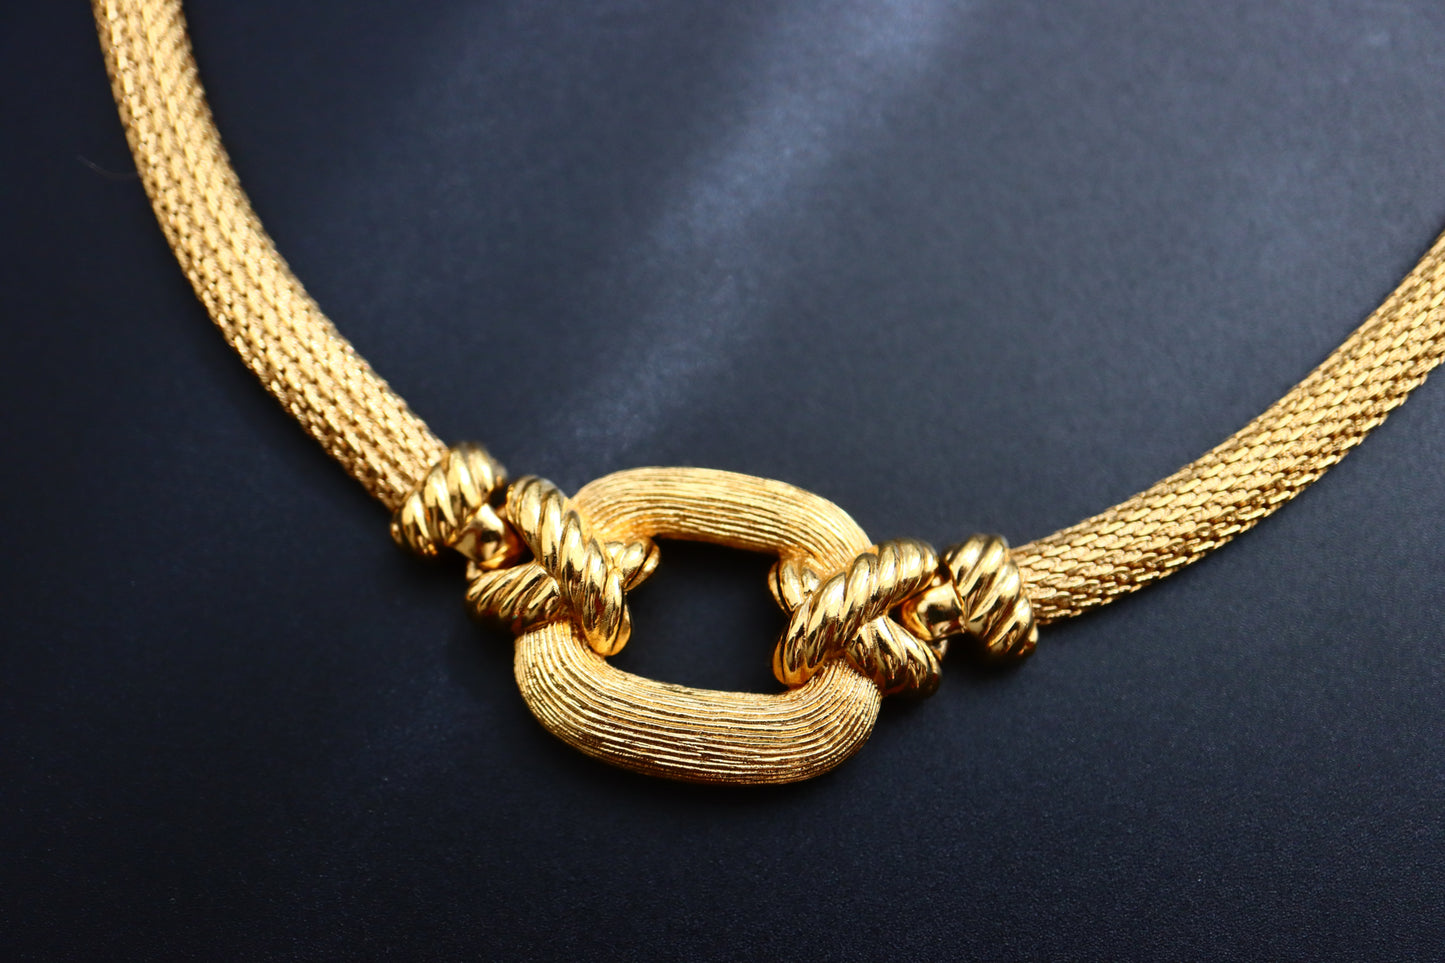 Vintage Christian Dior gold-tone weaving cross necklace